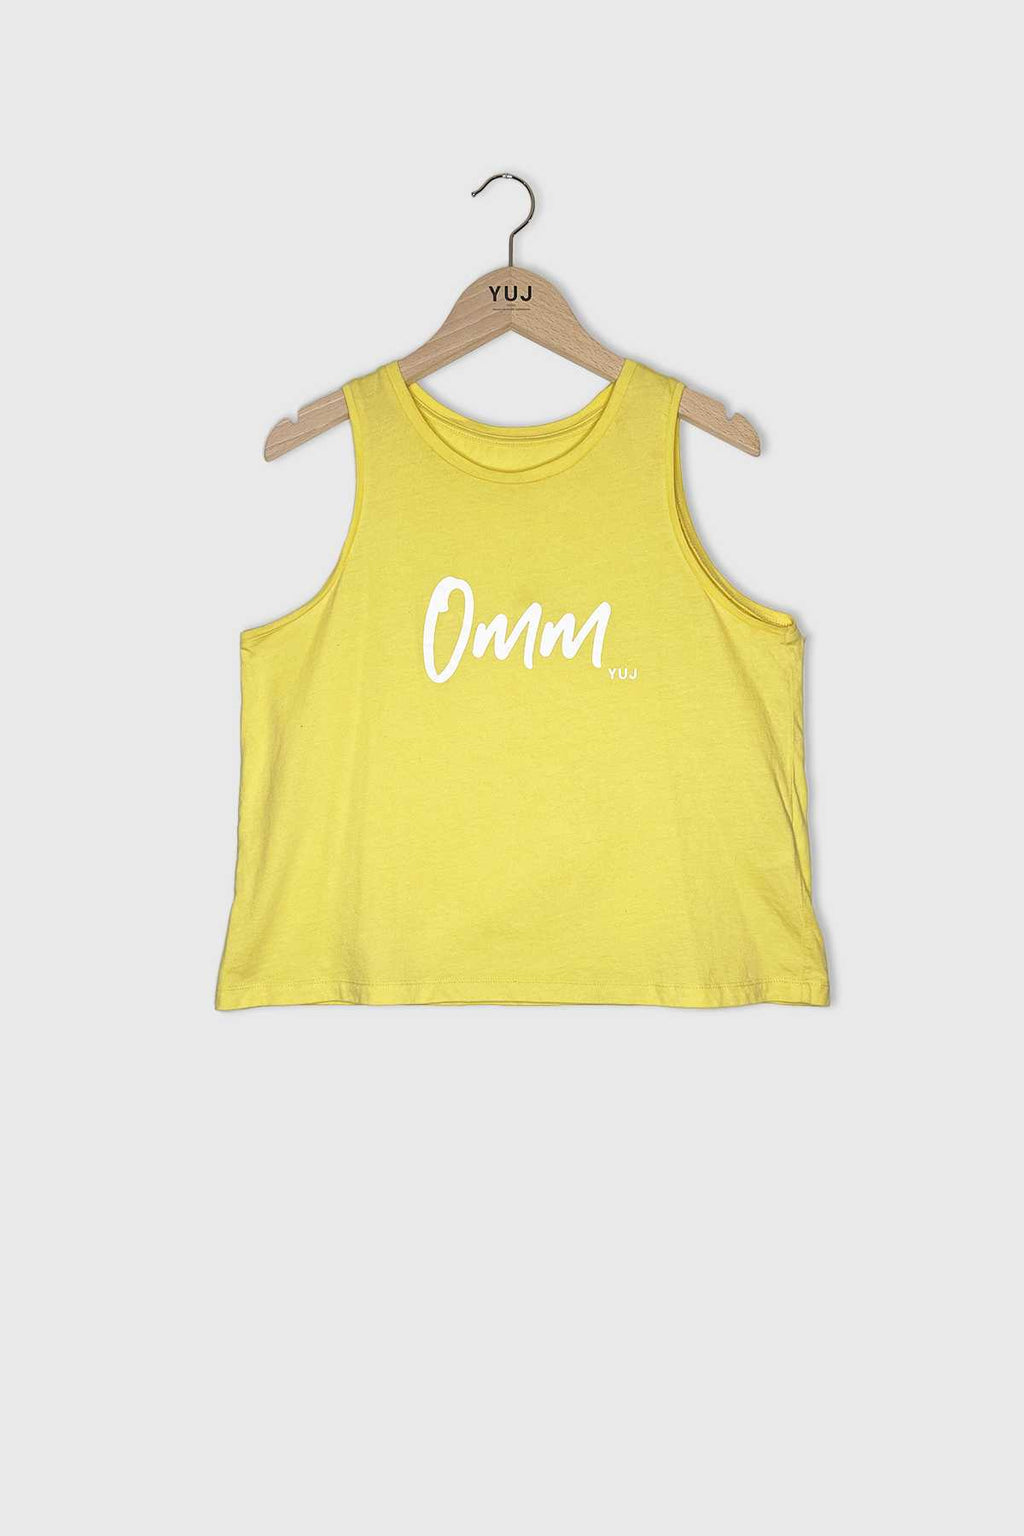 #394 - OMM yellow tank top // Size S YUJ - House of Mindfulness